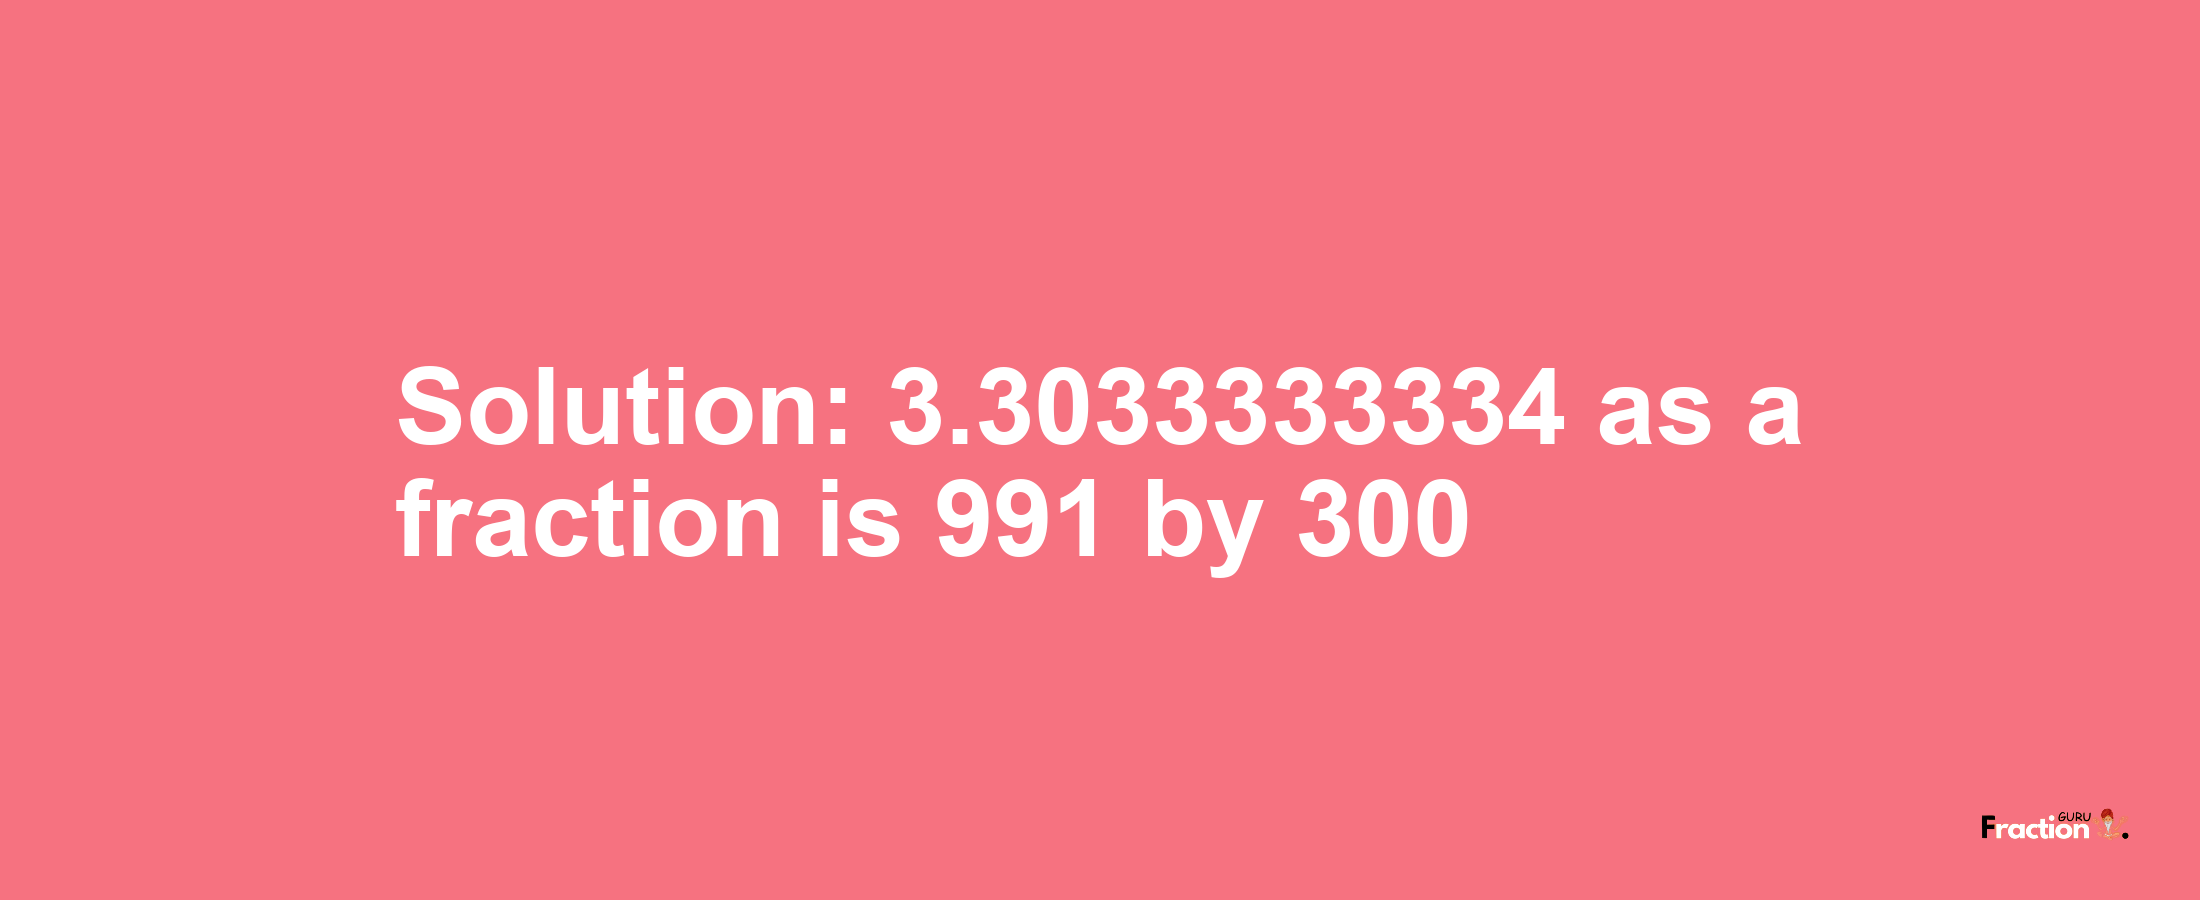 Solution:3.3033333334 as a fraction is 991/300